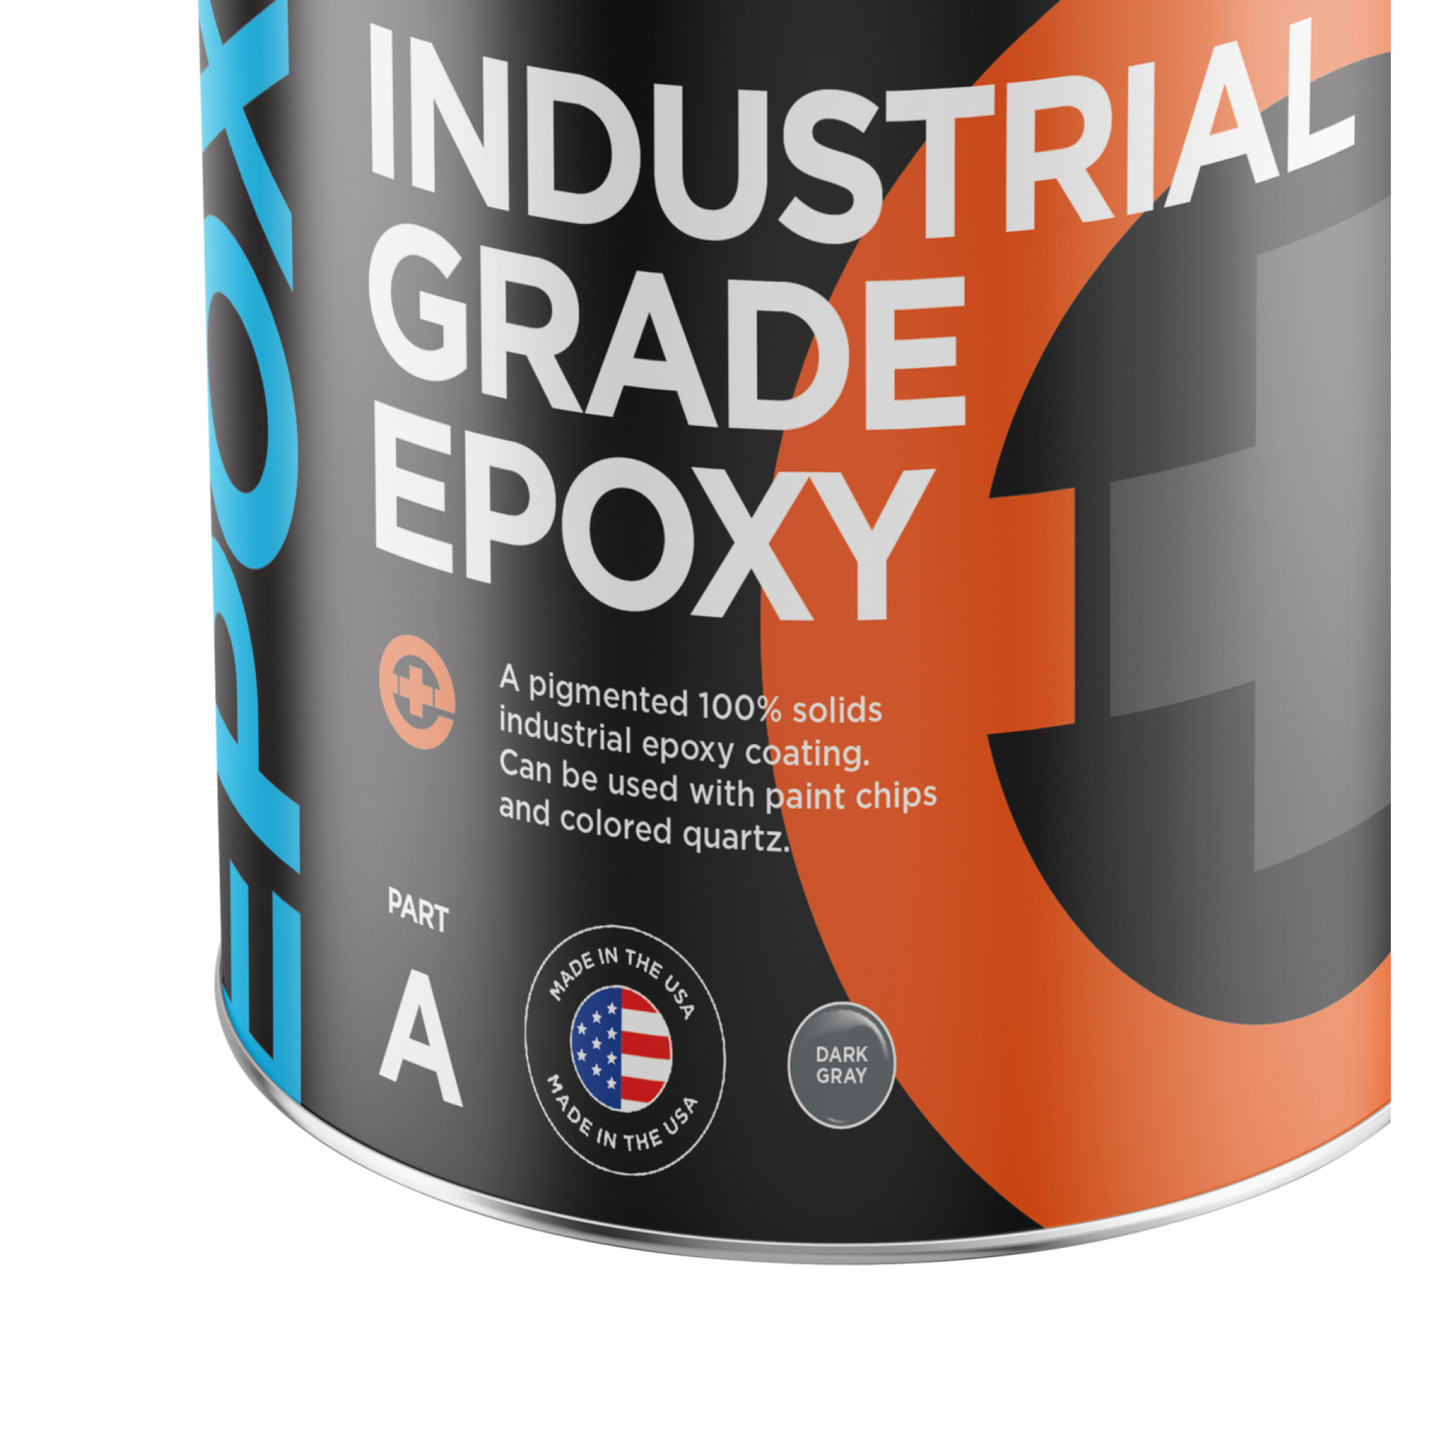 Durable Beauty: Dark Grey Epoxy Kit for 300-450SF Coverage